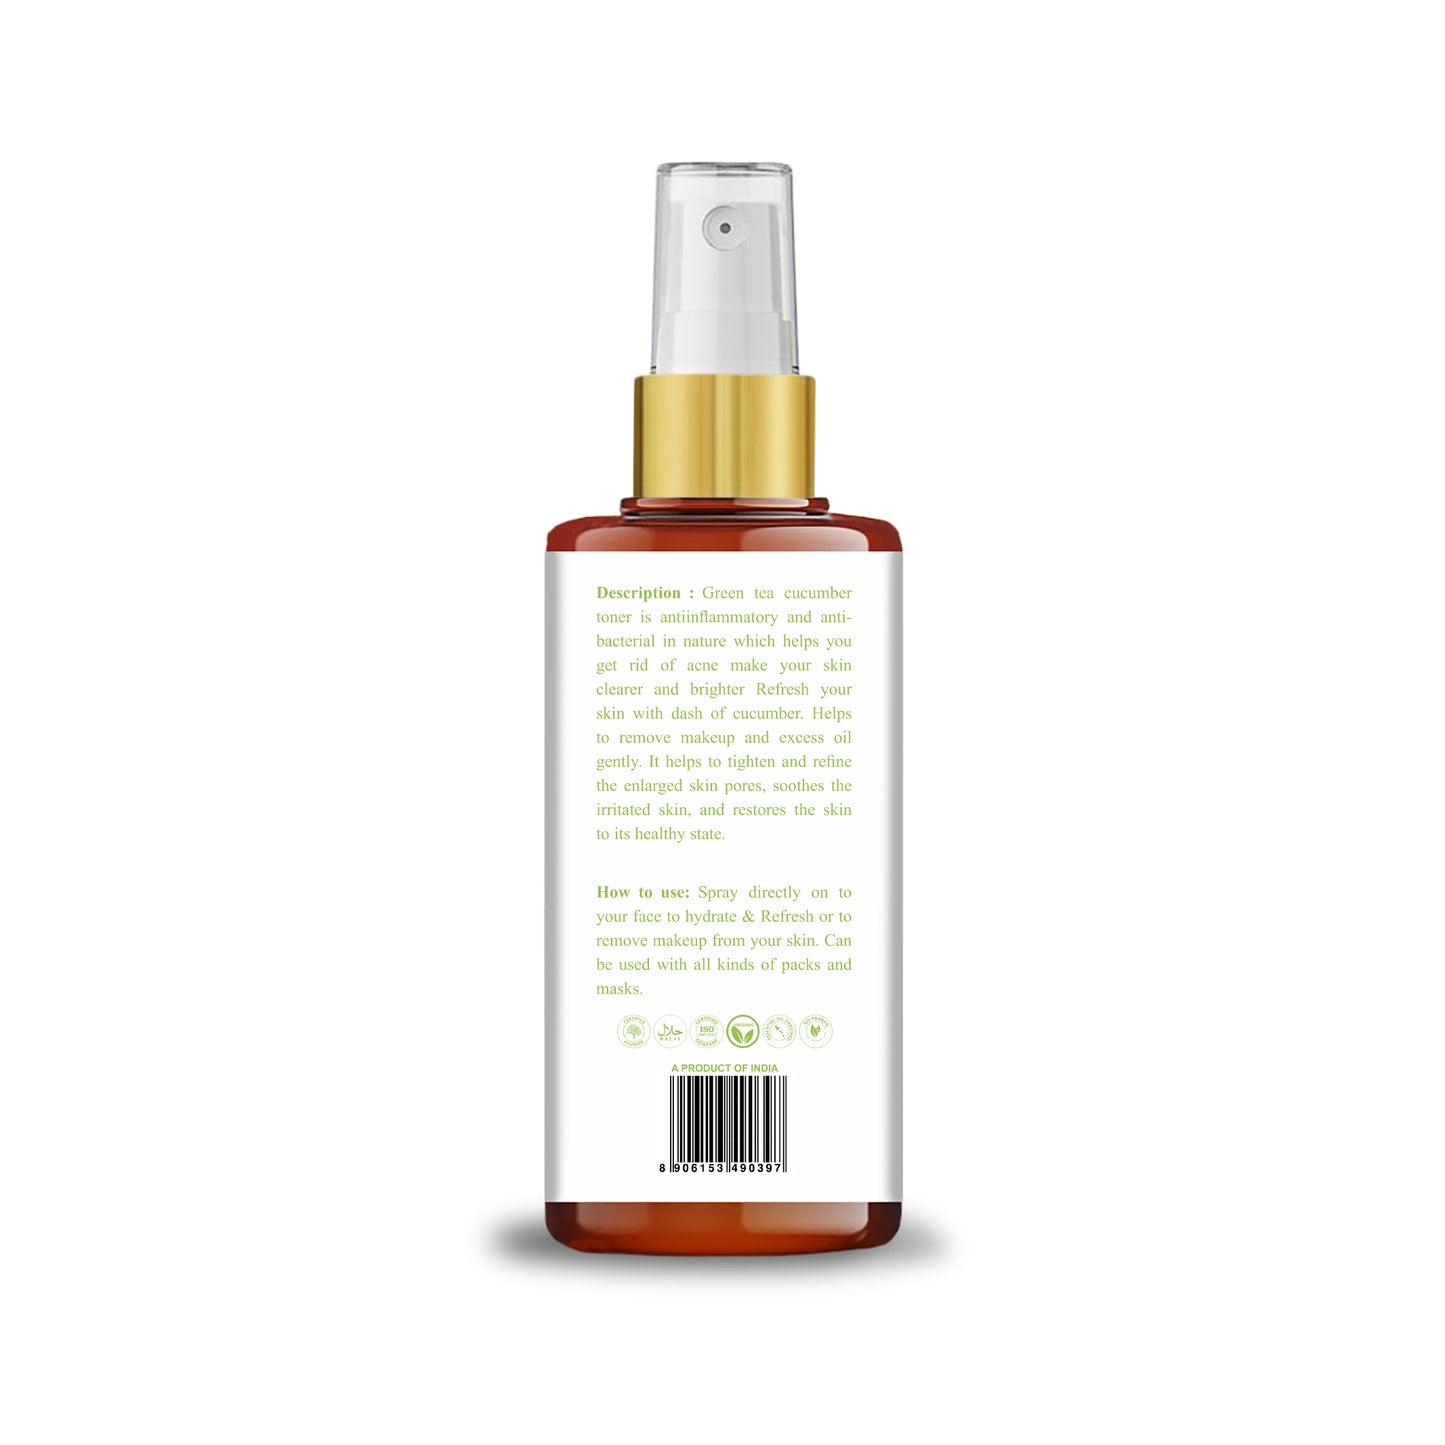 Green Tea & Cucumber Toner (100ml) With Green Tea Extract |Soothing | Unclog Pores| Hydration